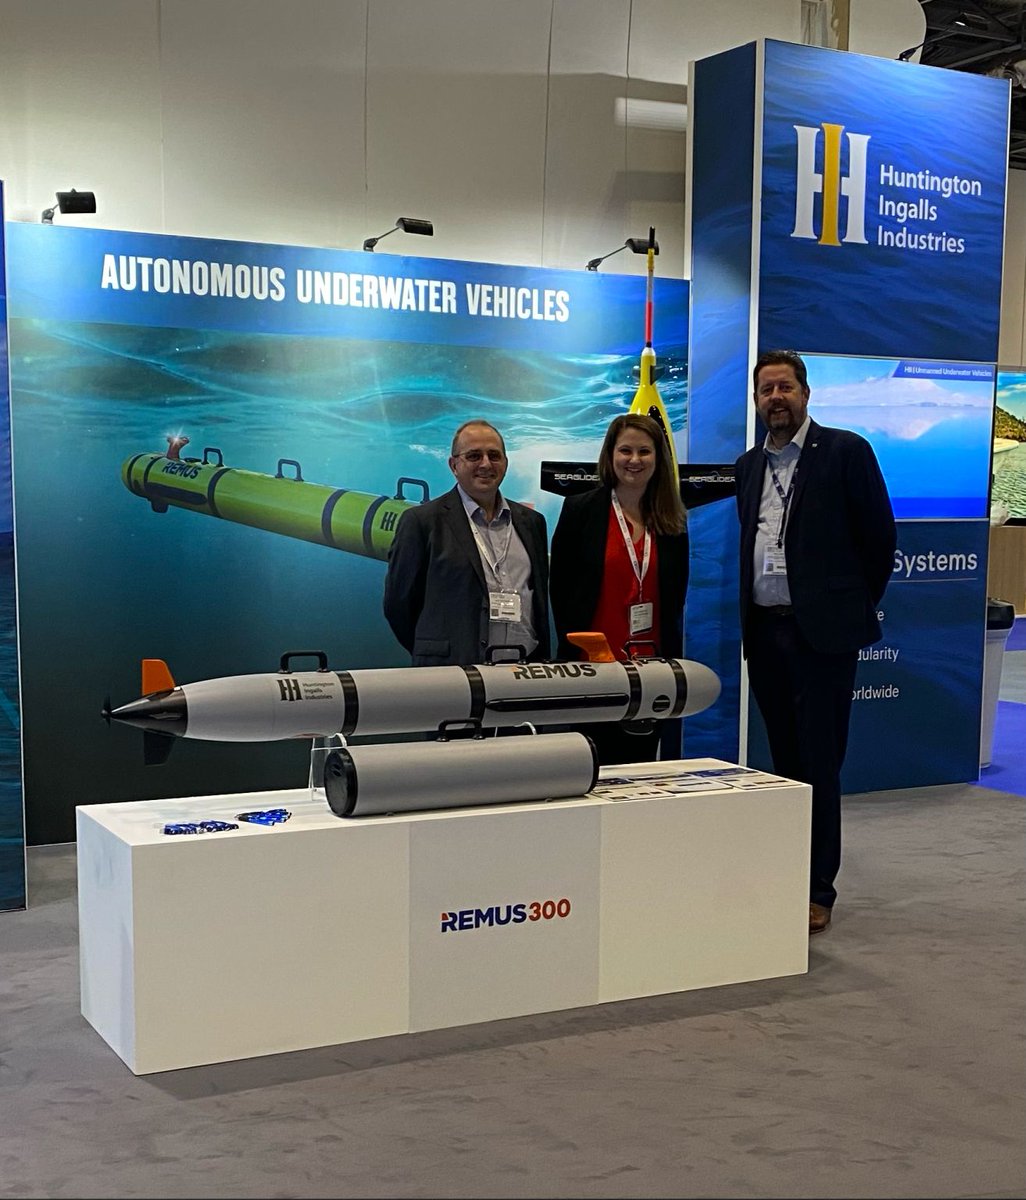 Catch HII Unmanned Systems at Oceanology International, London UK.. 15-17 March
ow.ly/vV0w50IkllY

#AUVSI #HII #Oceanology #REMUS300